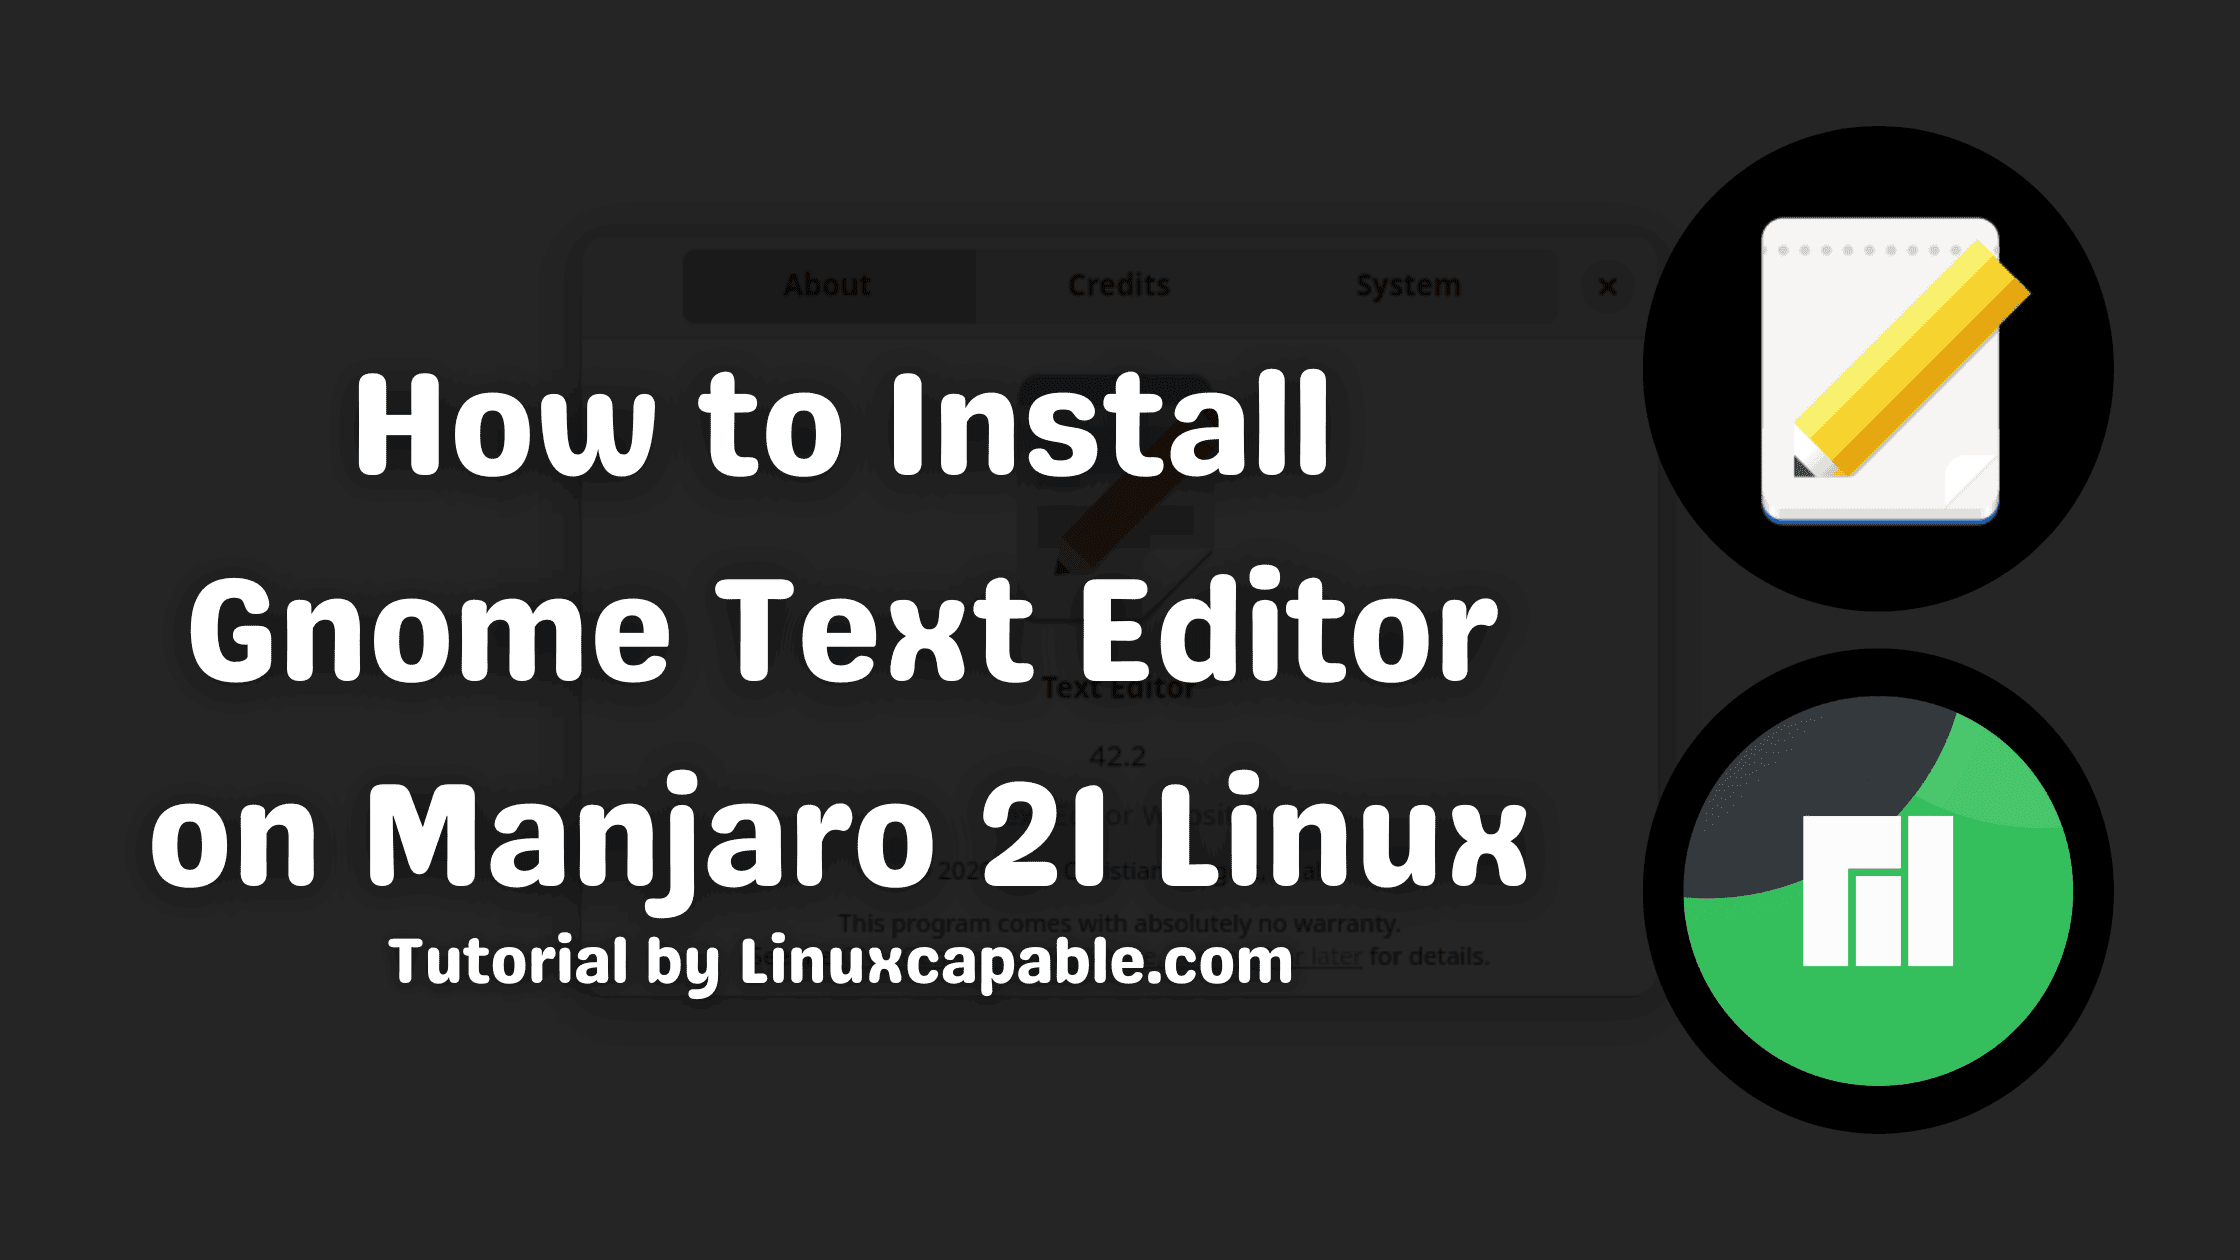 How to Install Gnome Text Editor on Manjaro 21 Linux